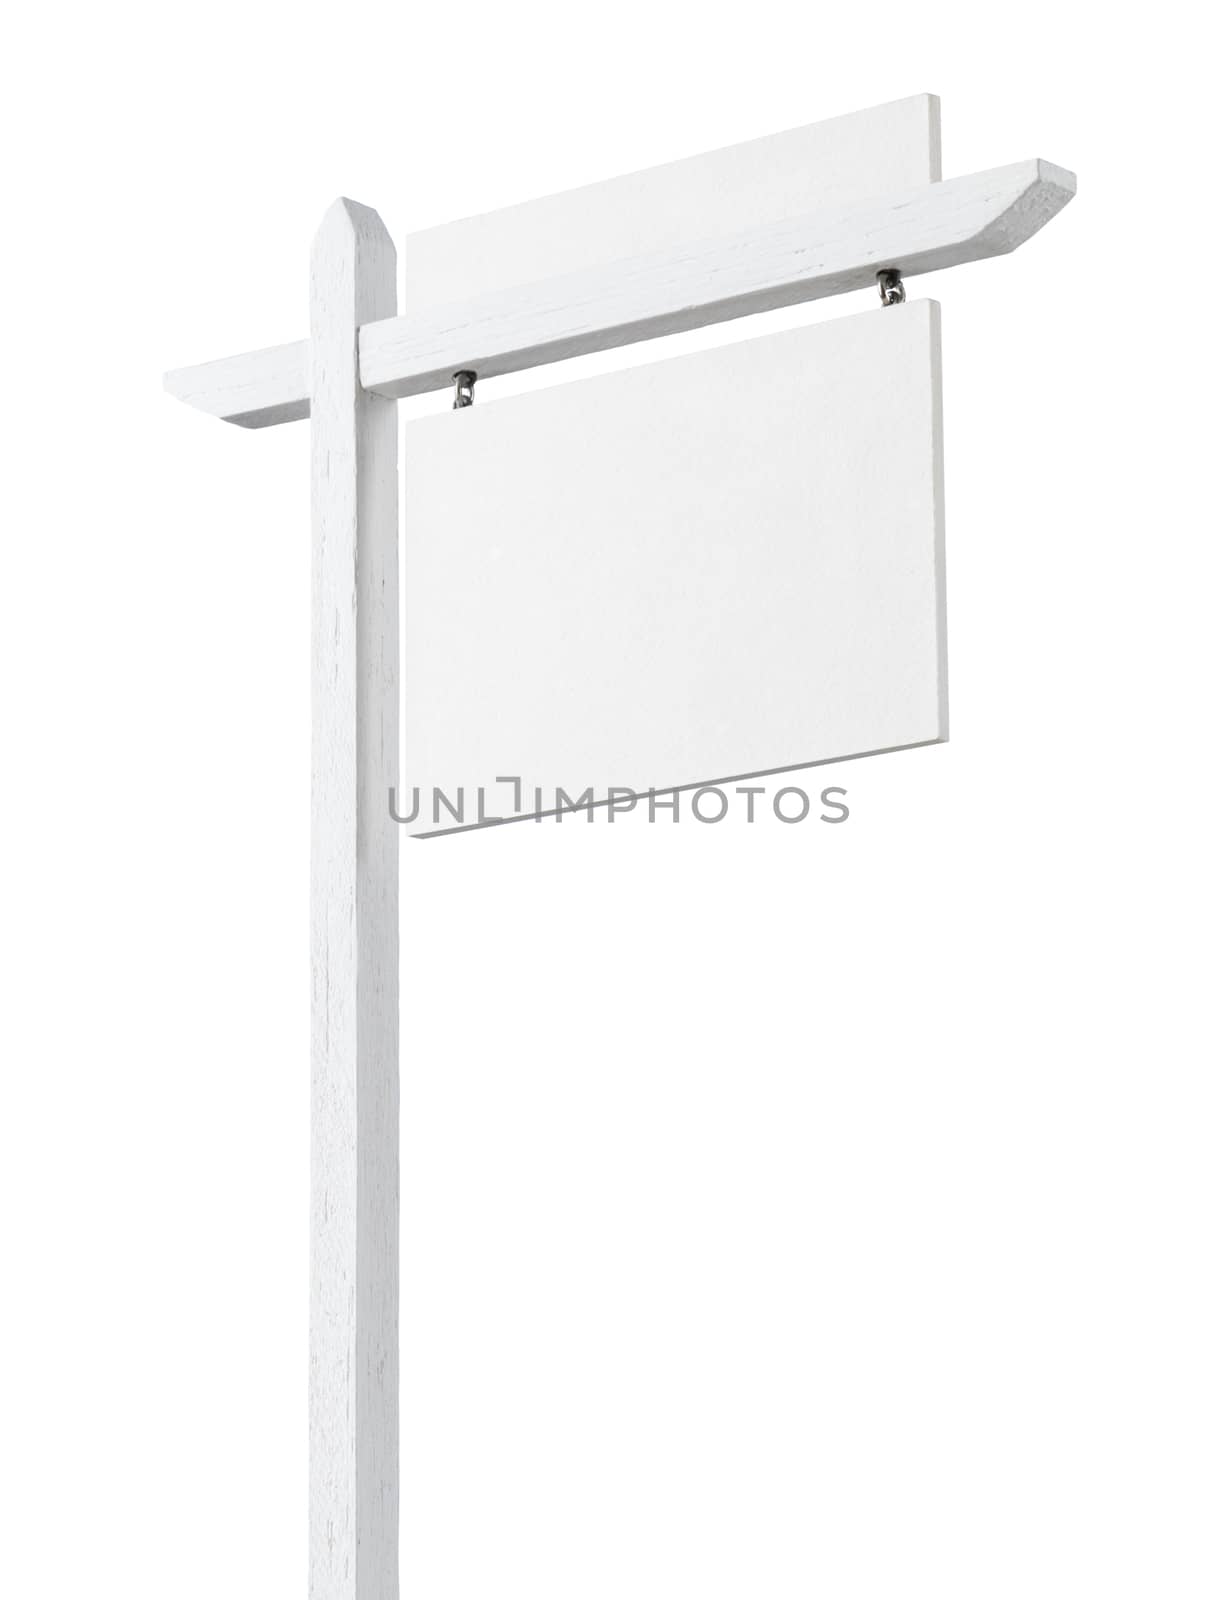 Blank Real Estate Sign with Upper Placard Ready For Your Own Tex by Feverpitched